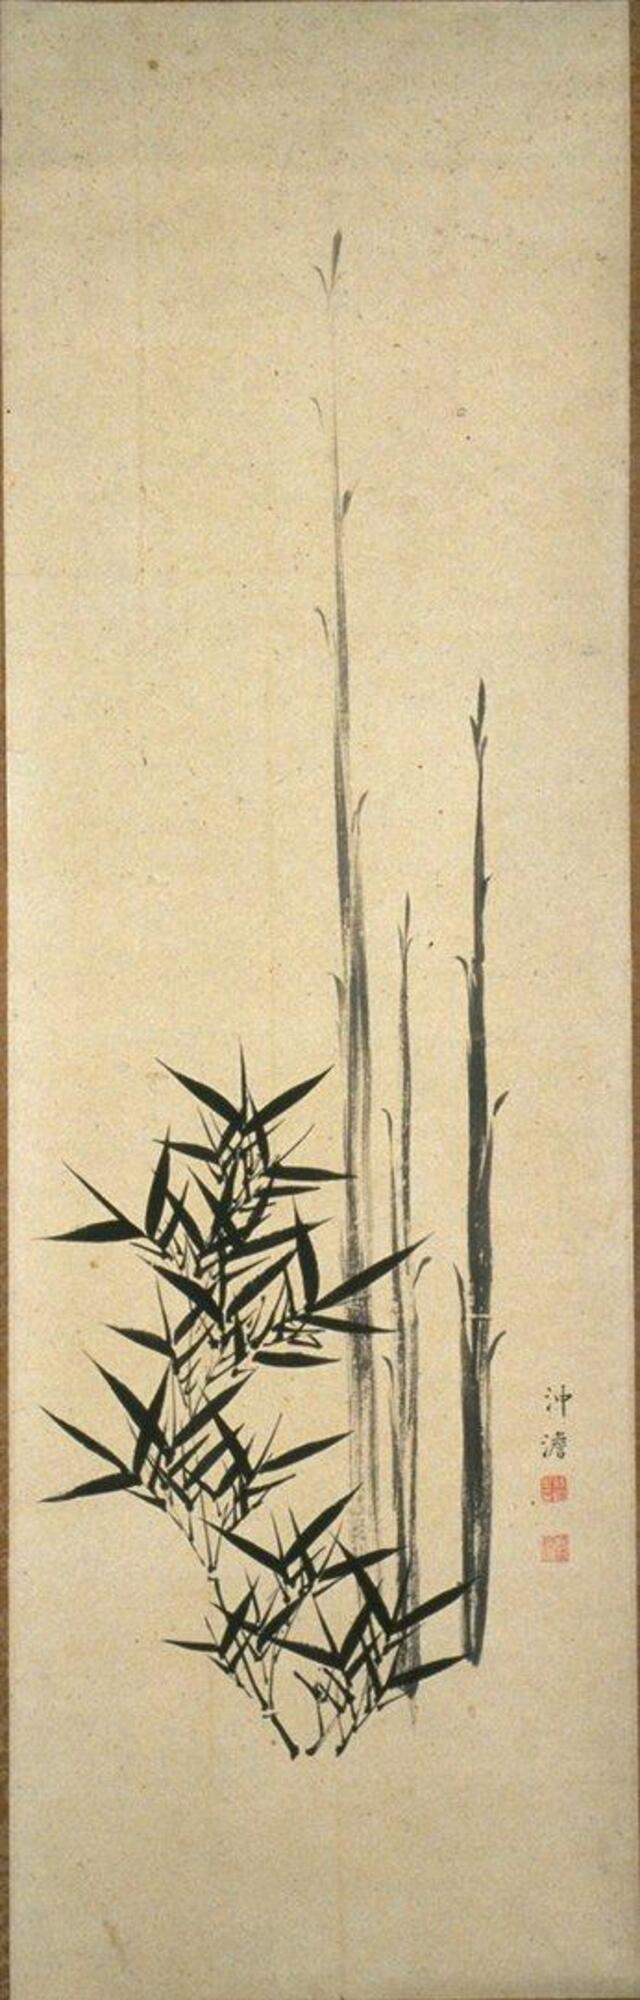 There is a small clump of bamboo rising toward the top of the hanging scroll. There are three stems and a small clump of leaves. In the bottom left corner of the hanging scroll are two seals by the artist.